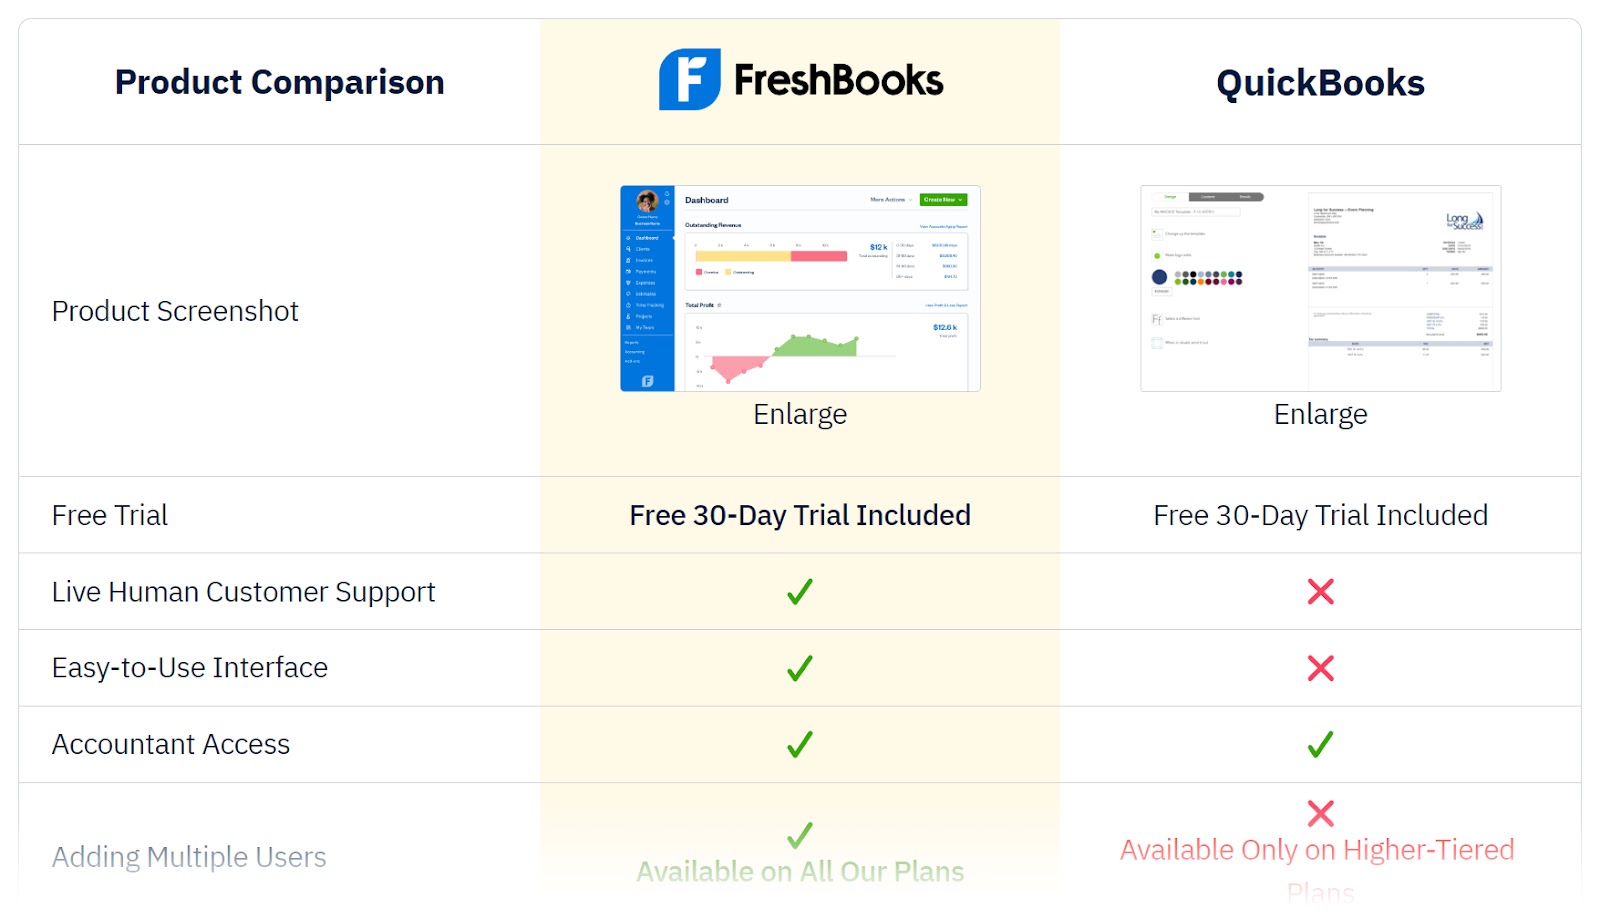 A table comparing FreshBooks and QuickBooks features